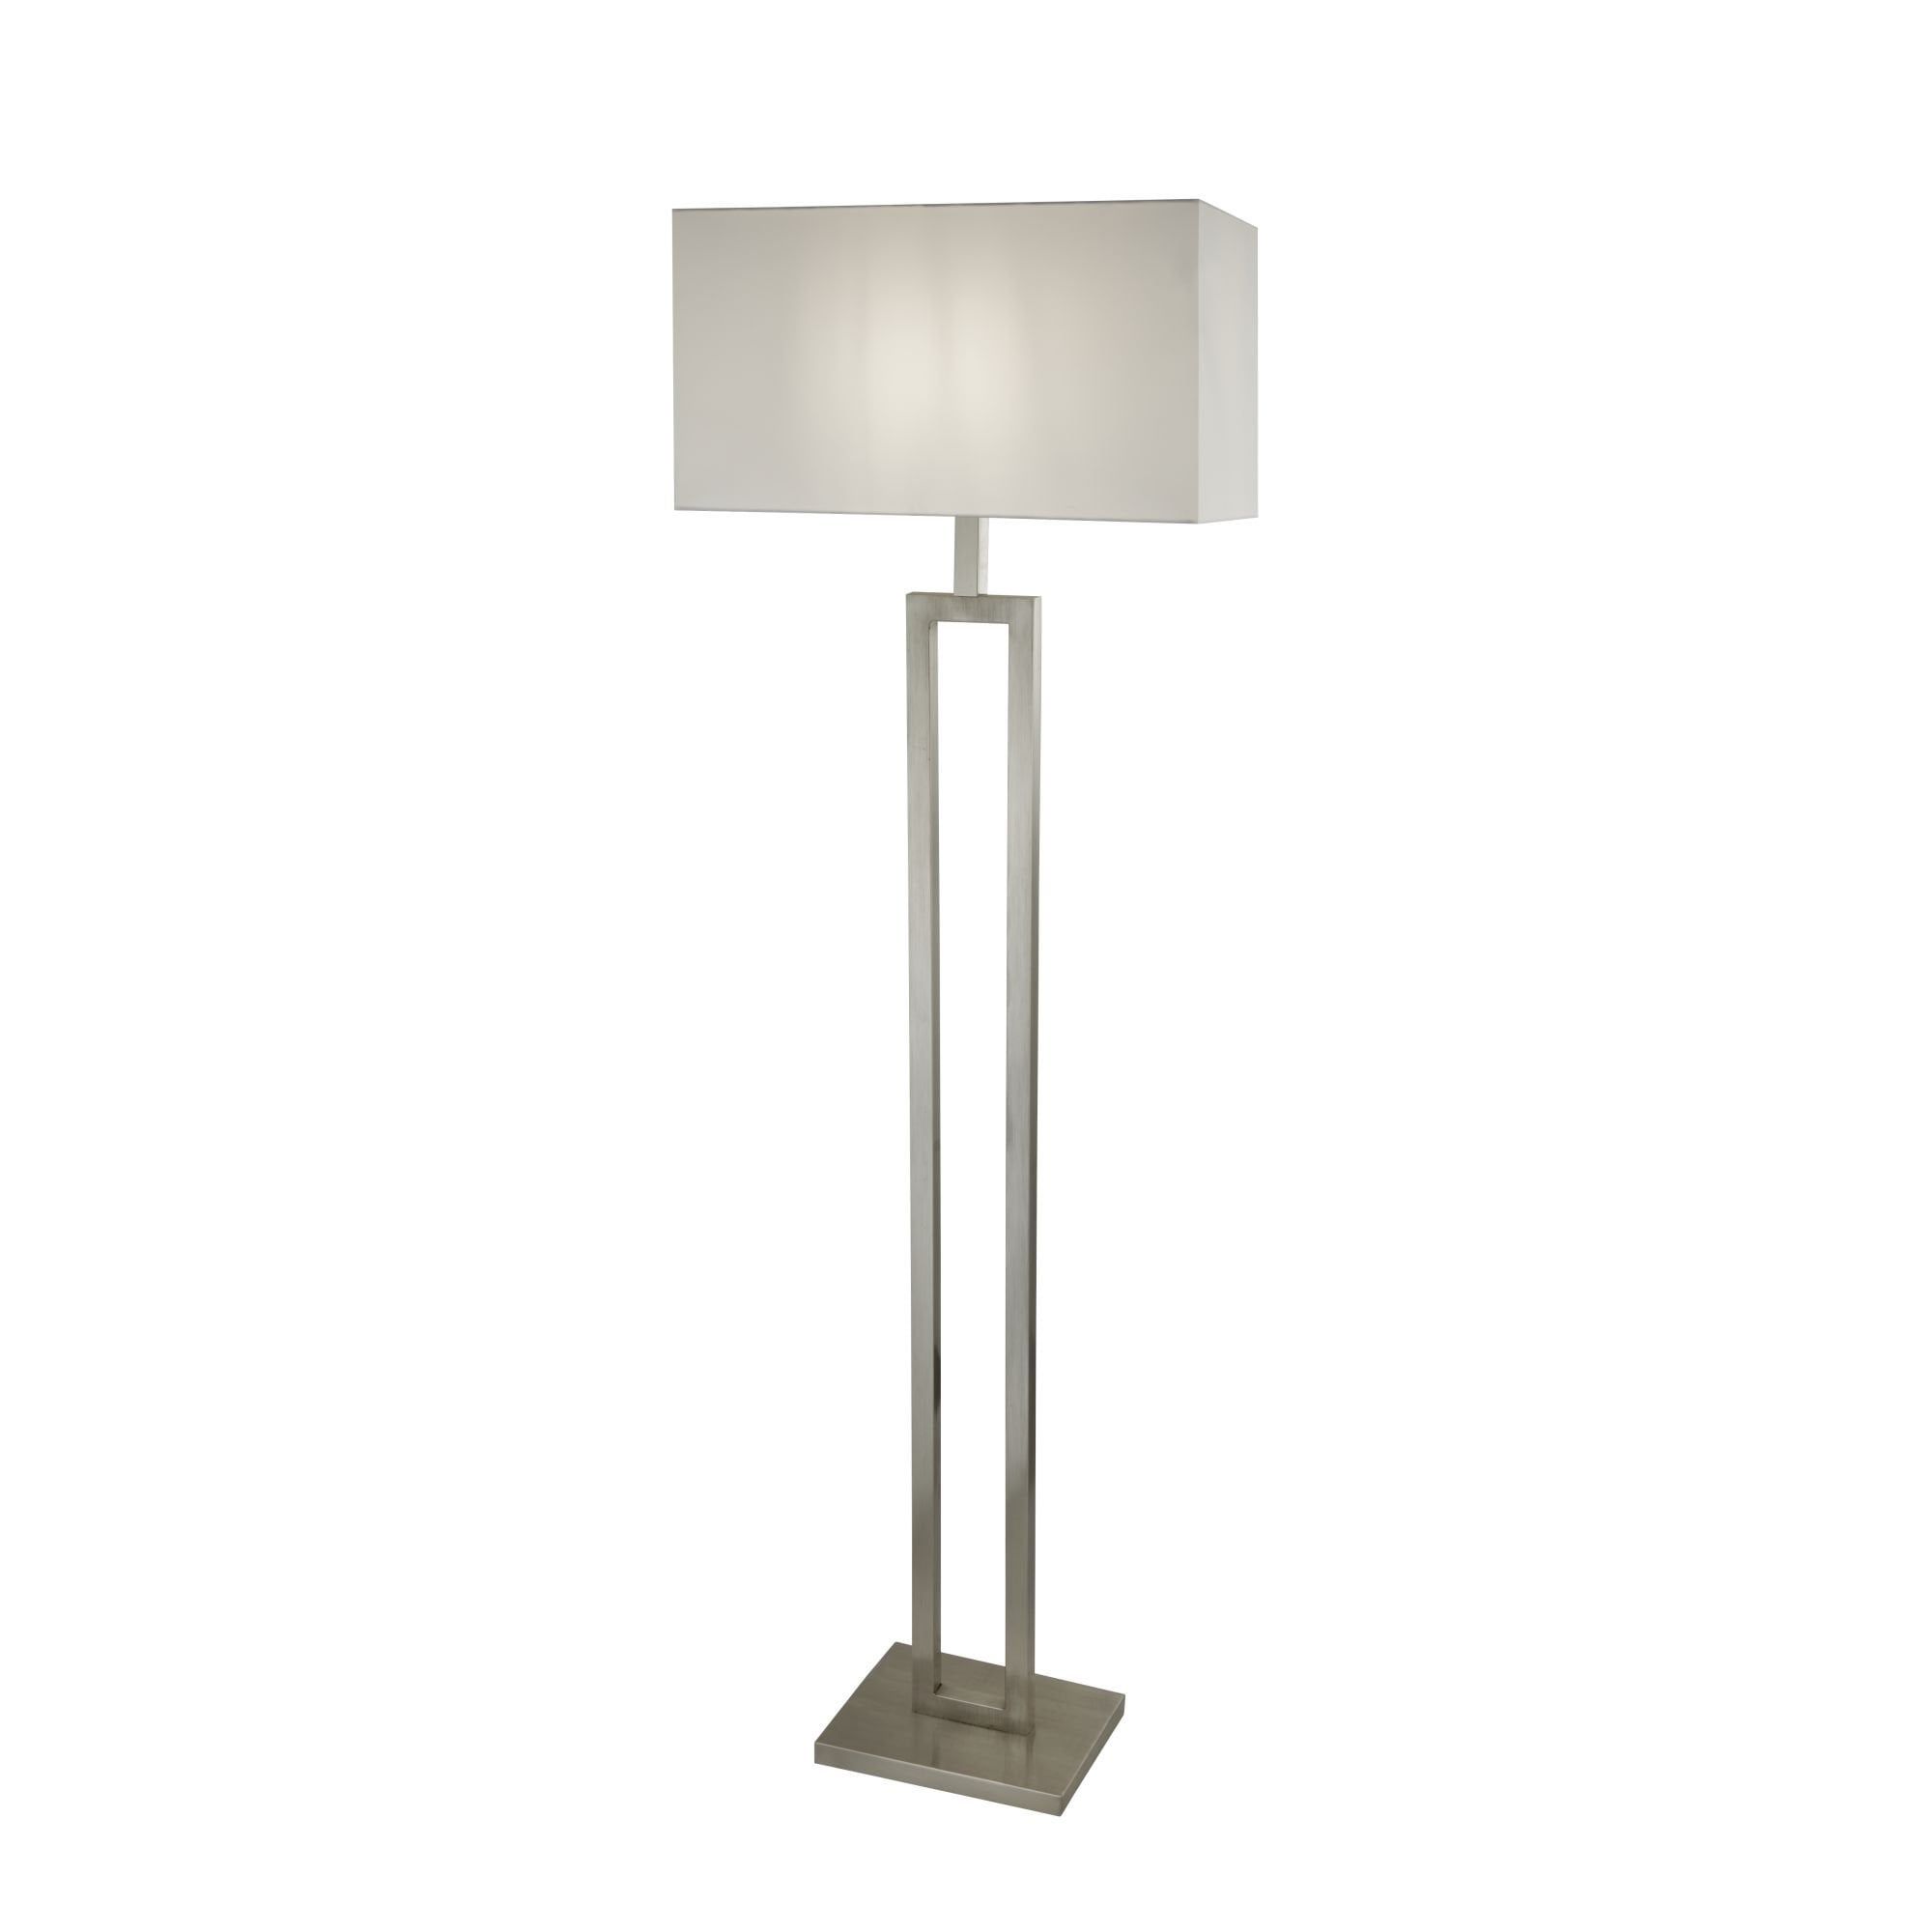 2330ss Floor Lamp Satin Silver White Shade Pertaining To Silver Floor Lamps (View 6 of 15)